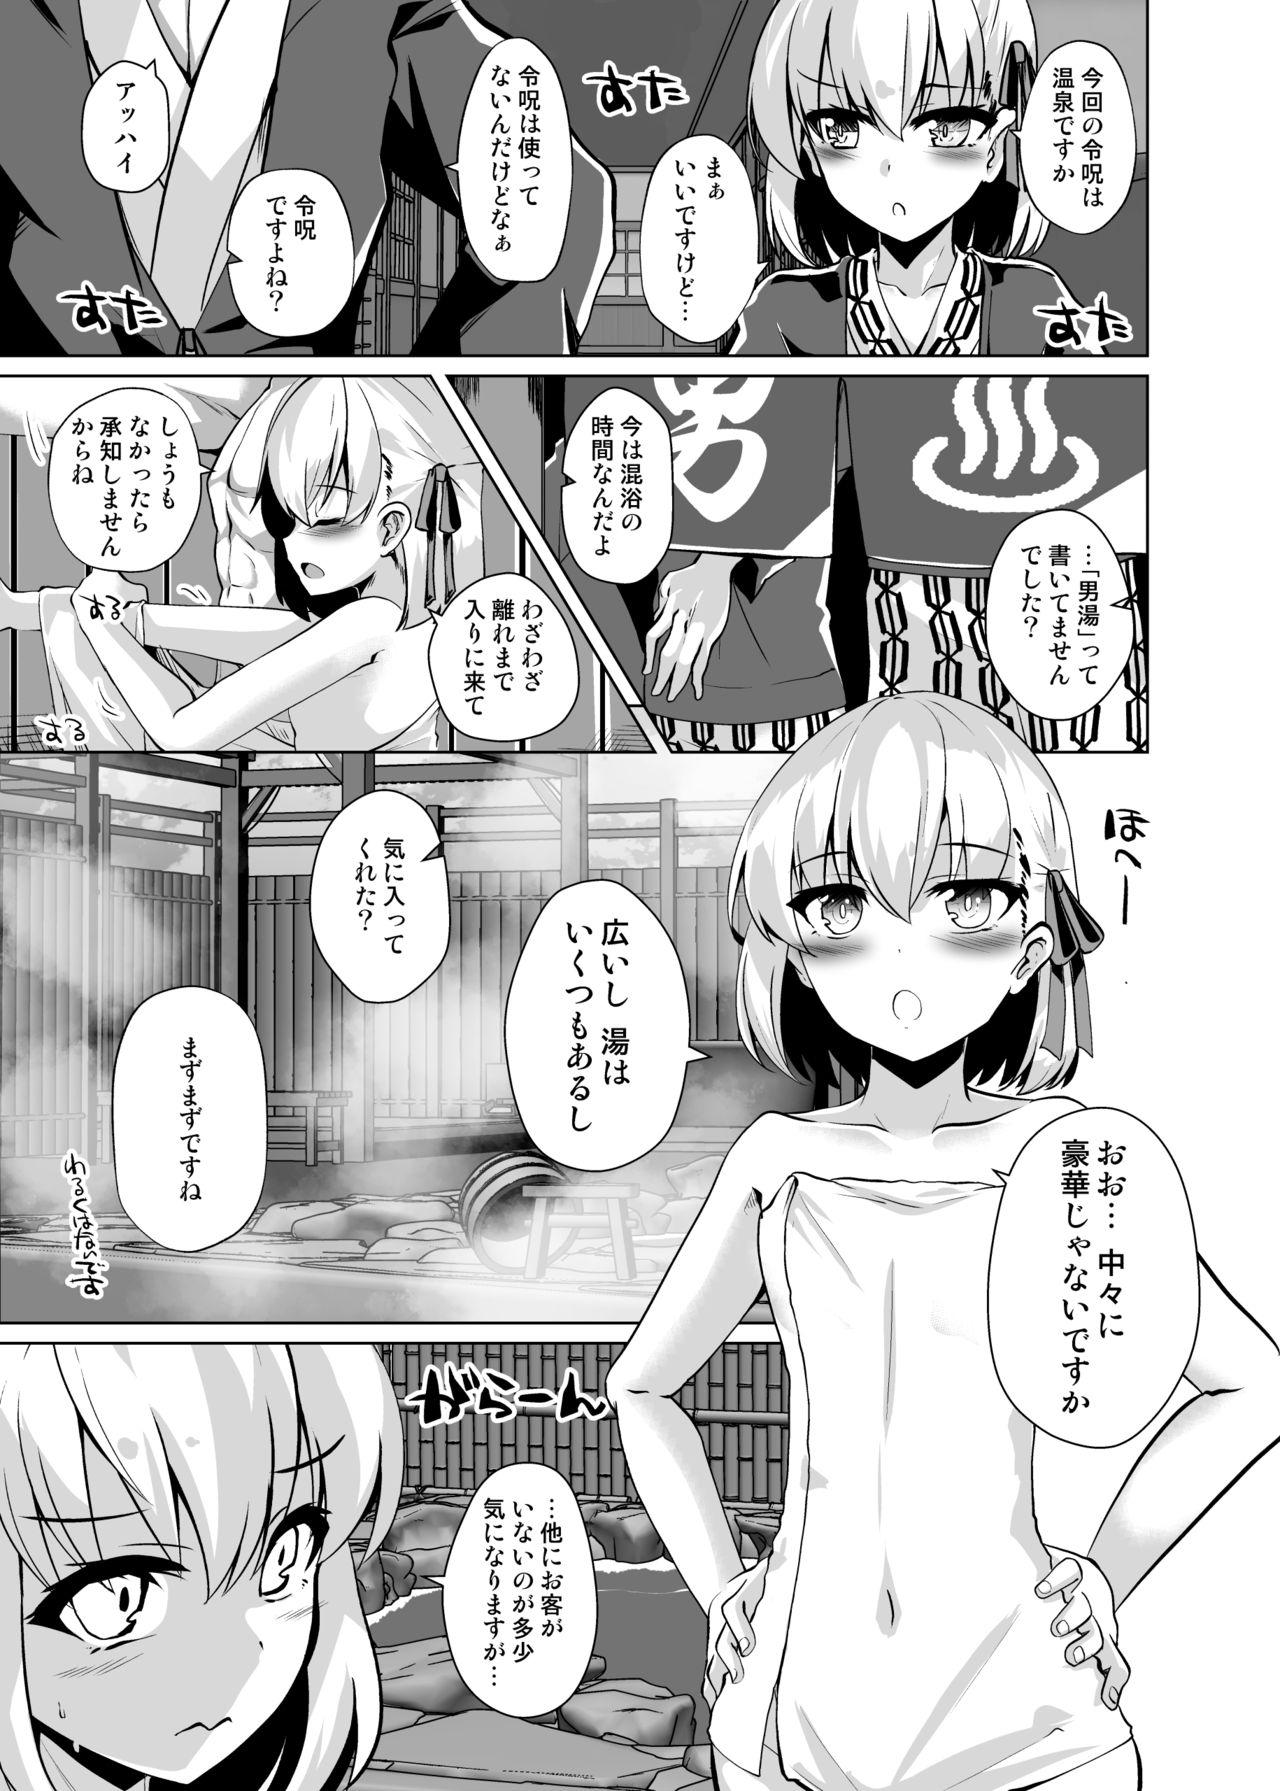 Watersports マスターさんのよわよわ棒に負け癖付けちゃいまーす - Fate grand order Gapes Gaping Asshole - Page 4